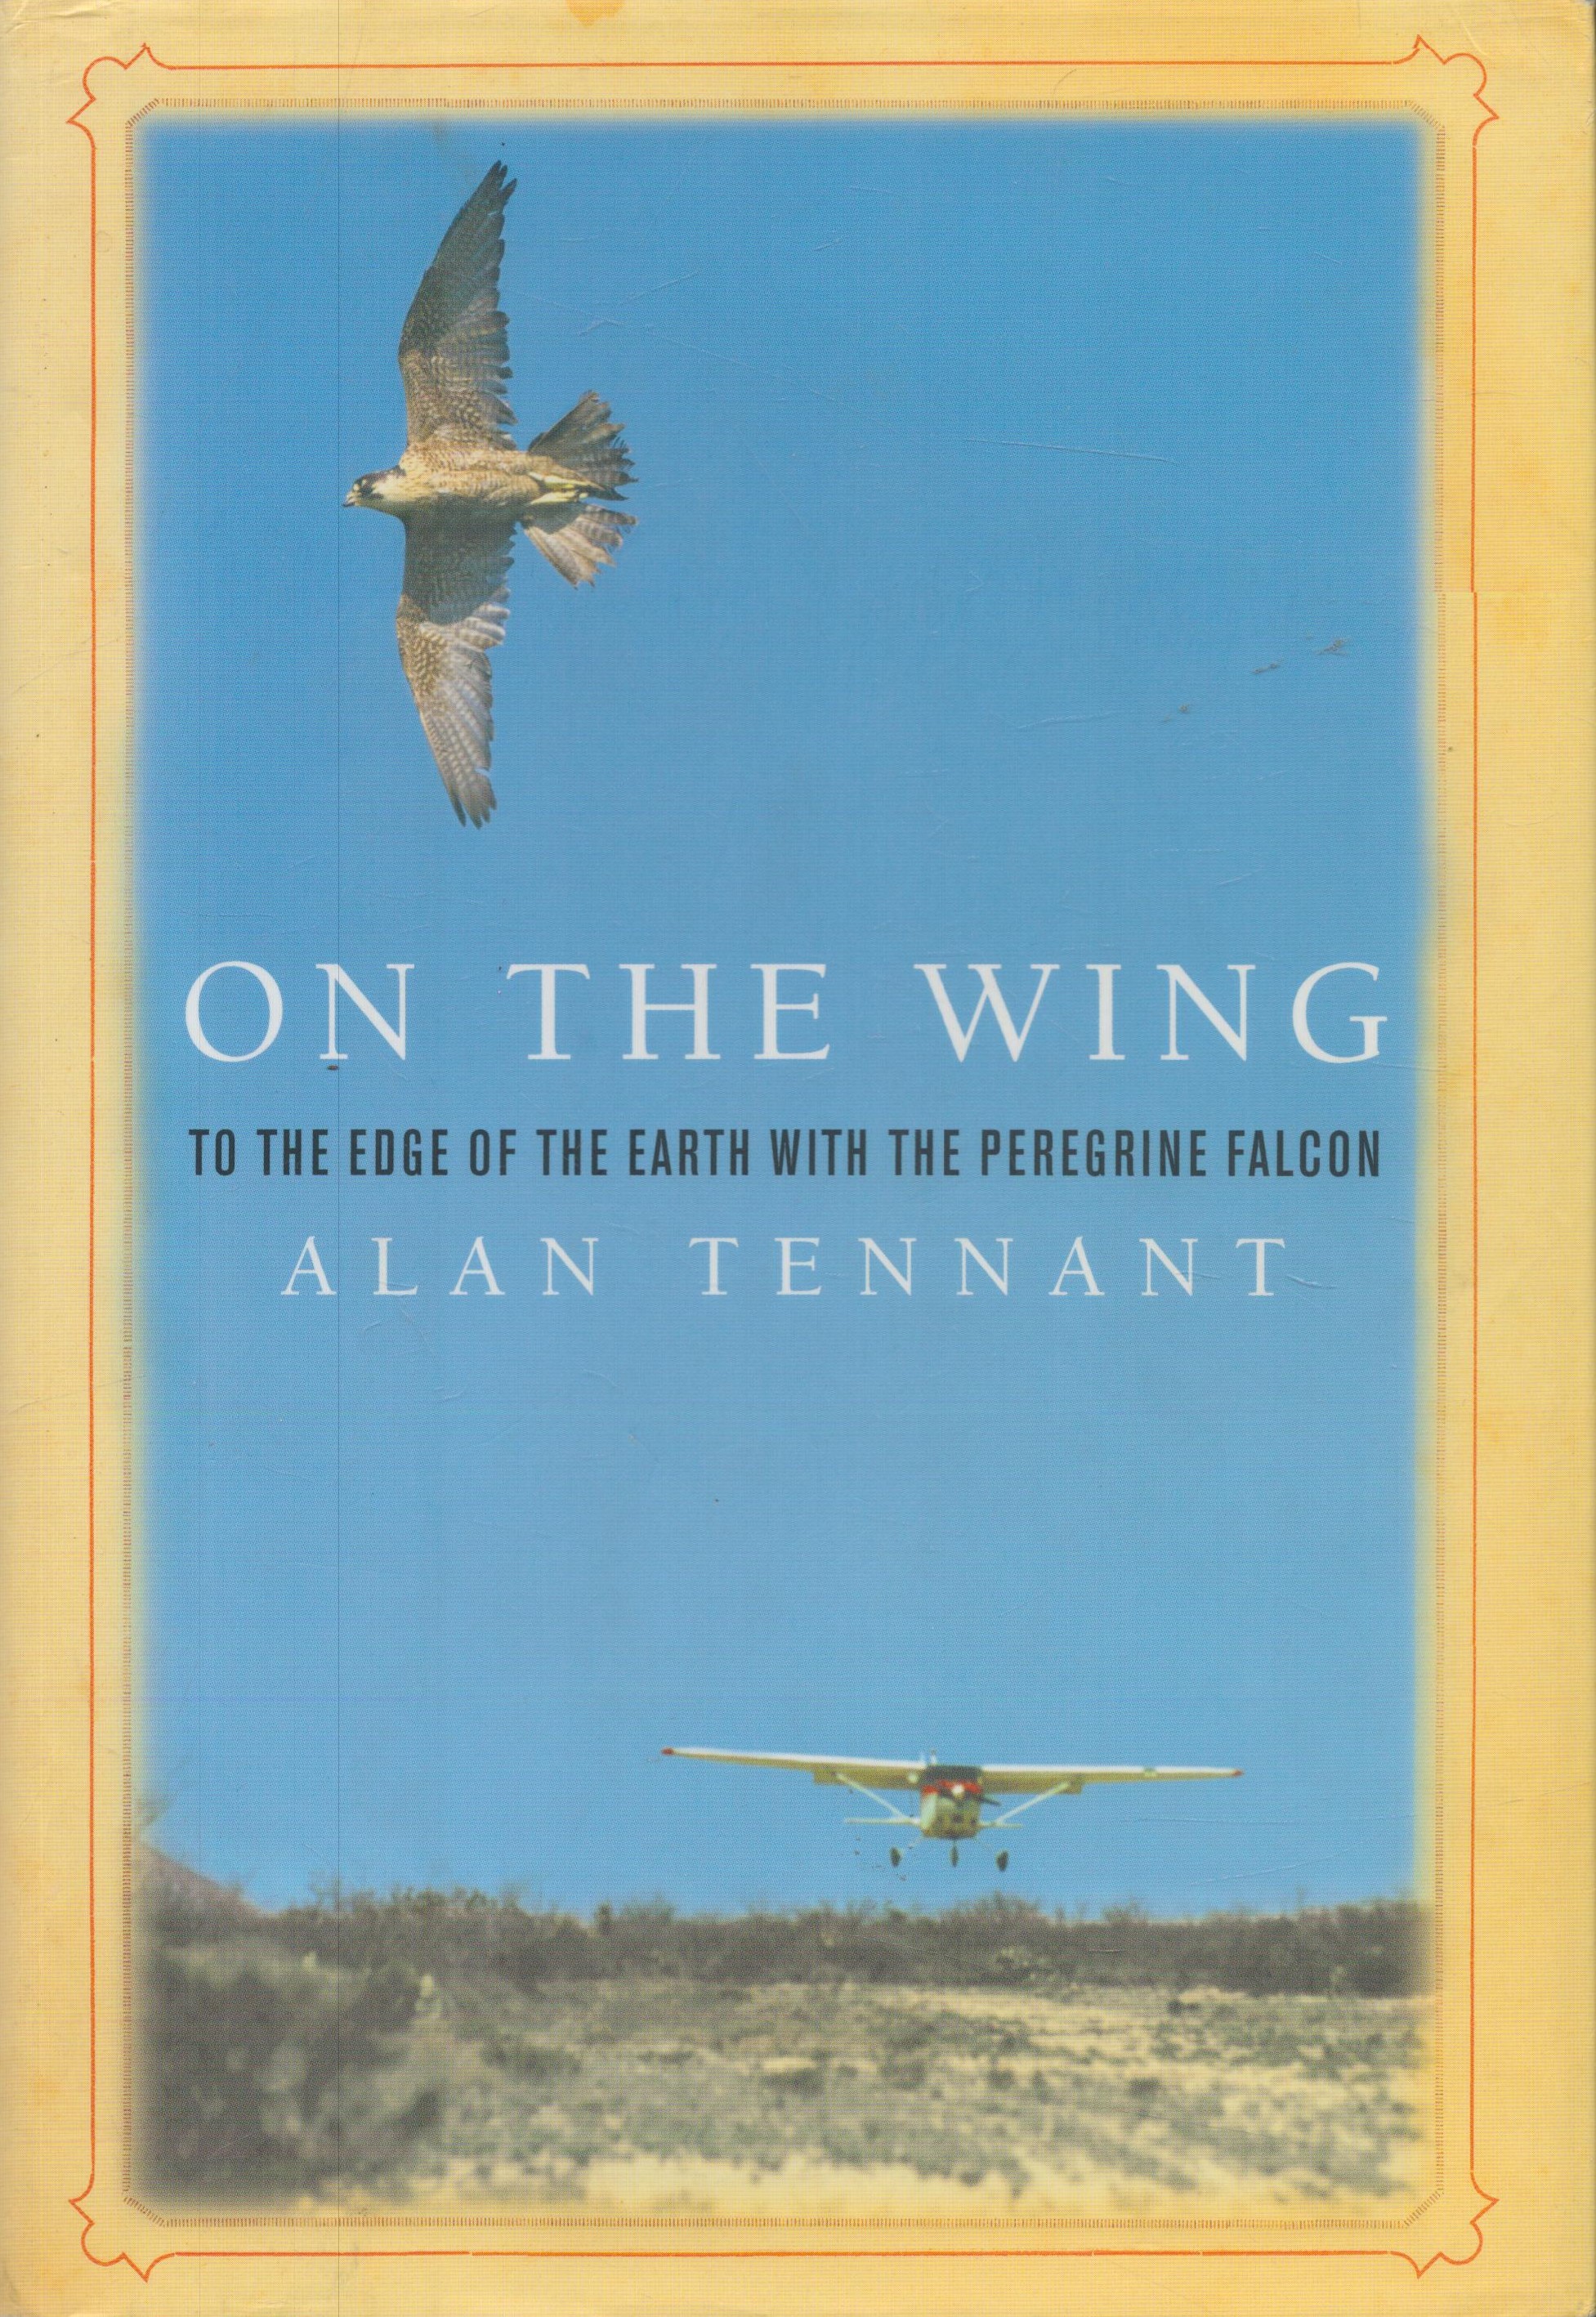 Alan Tennant Signed Book On The Wing To the Edge of the Earth with the Perigrine Falcon by Alan